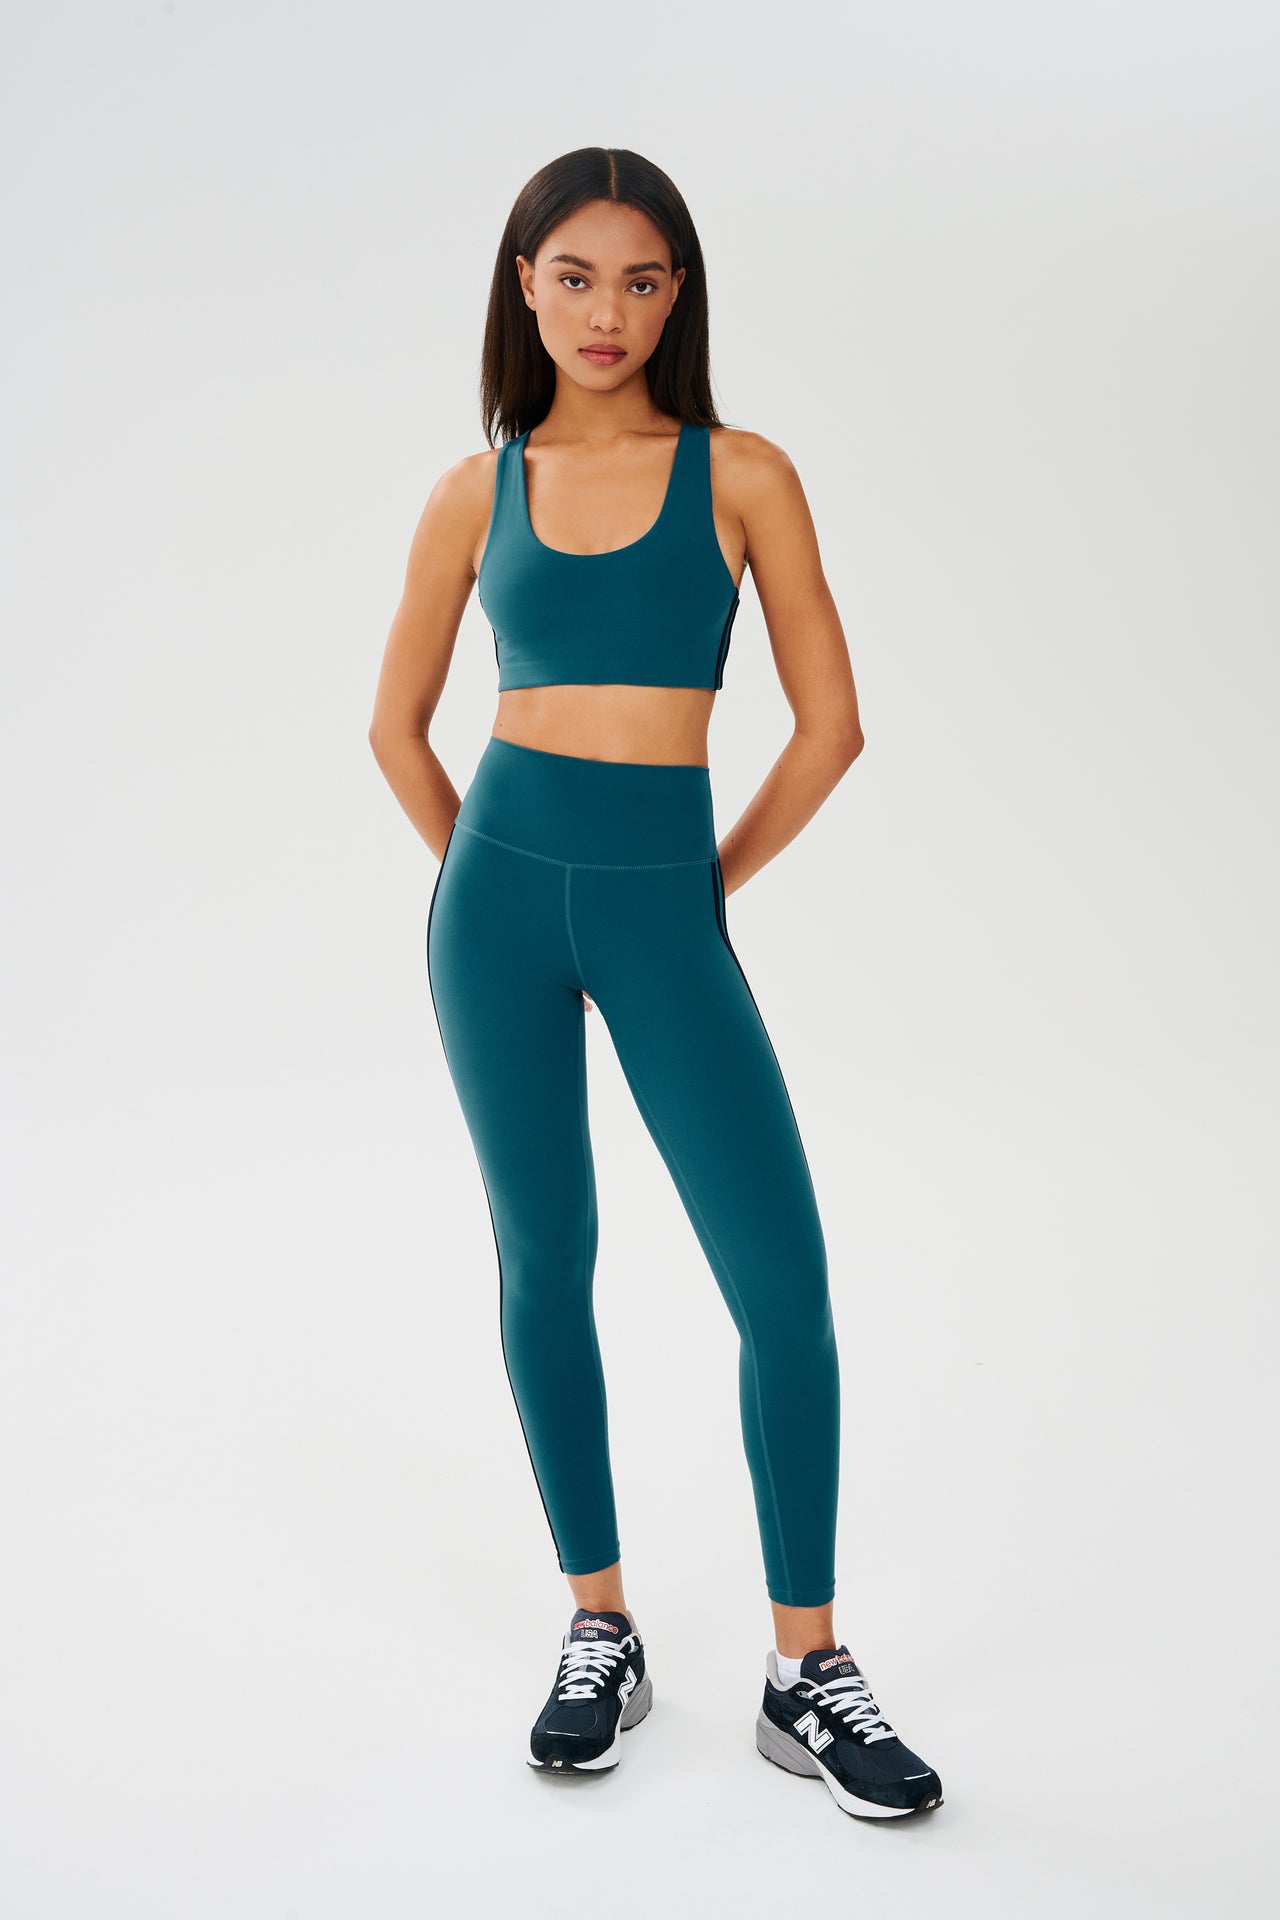 Full front view of girl wearing greenish blue sports bra with two thin black stripes down the side and greenish blue leggings with dark blue shoes